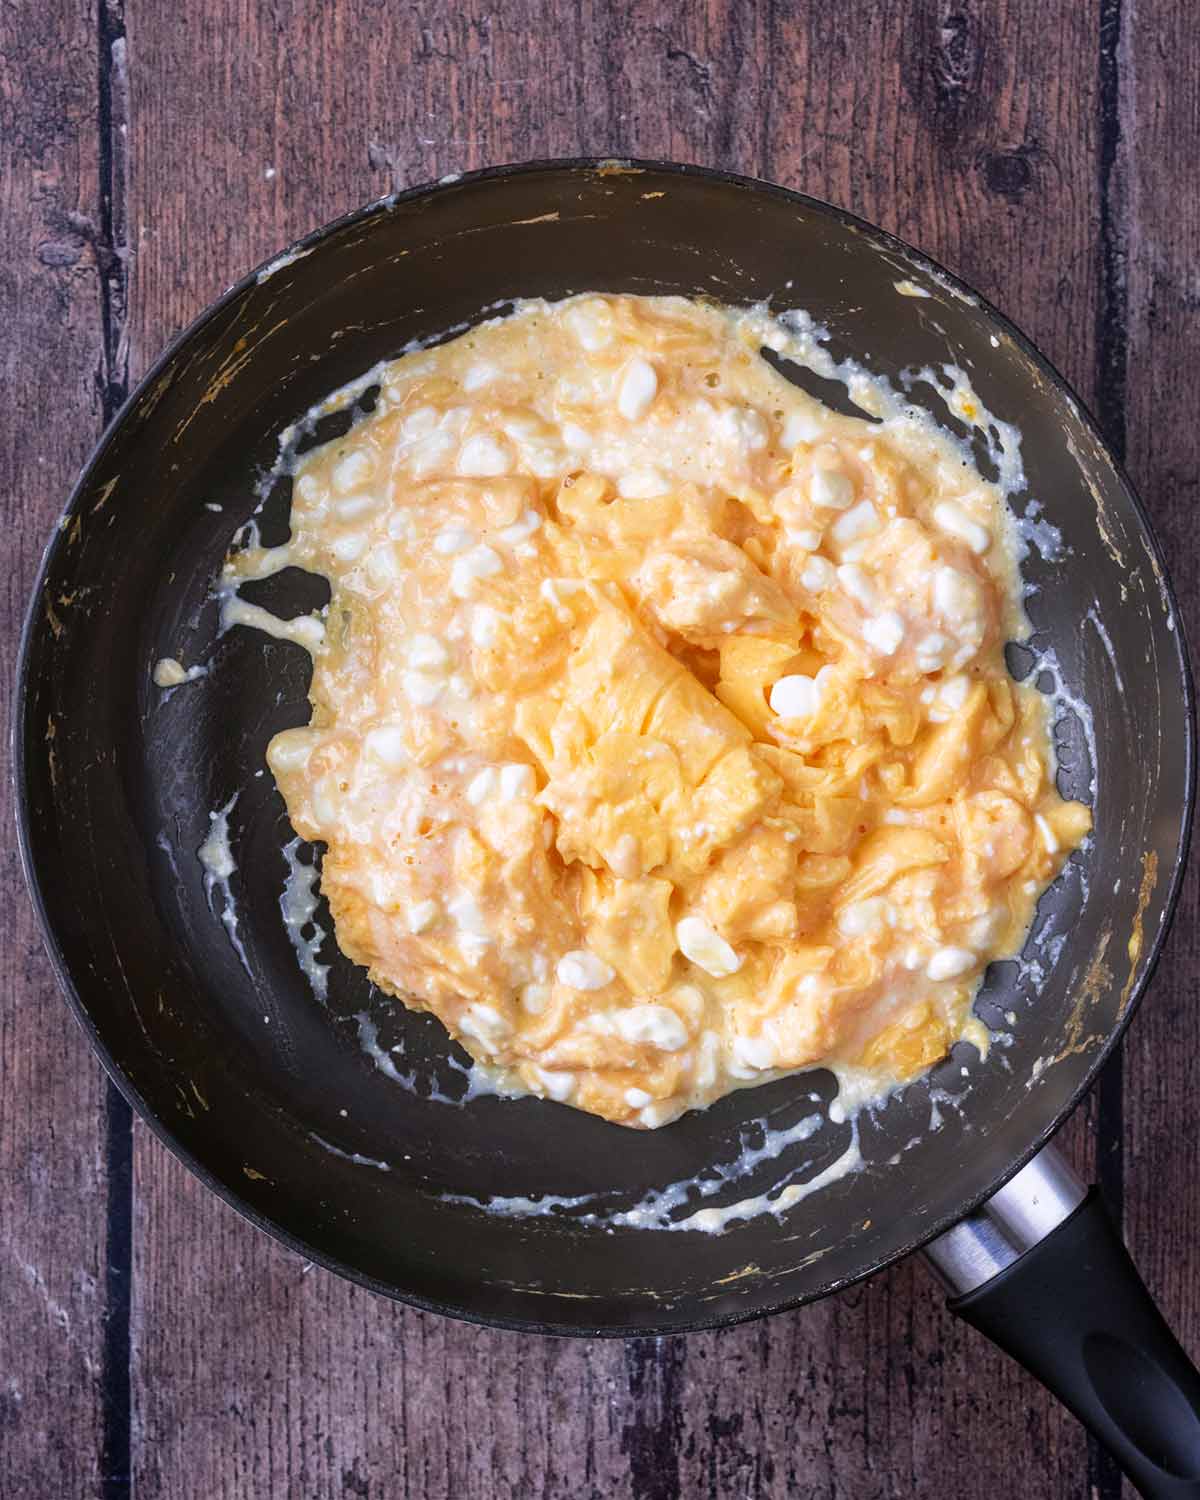 Scrambled eggs and cottage cheese mixed together in the pan.